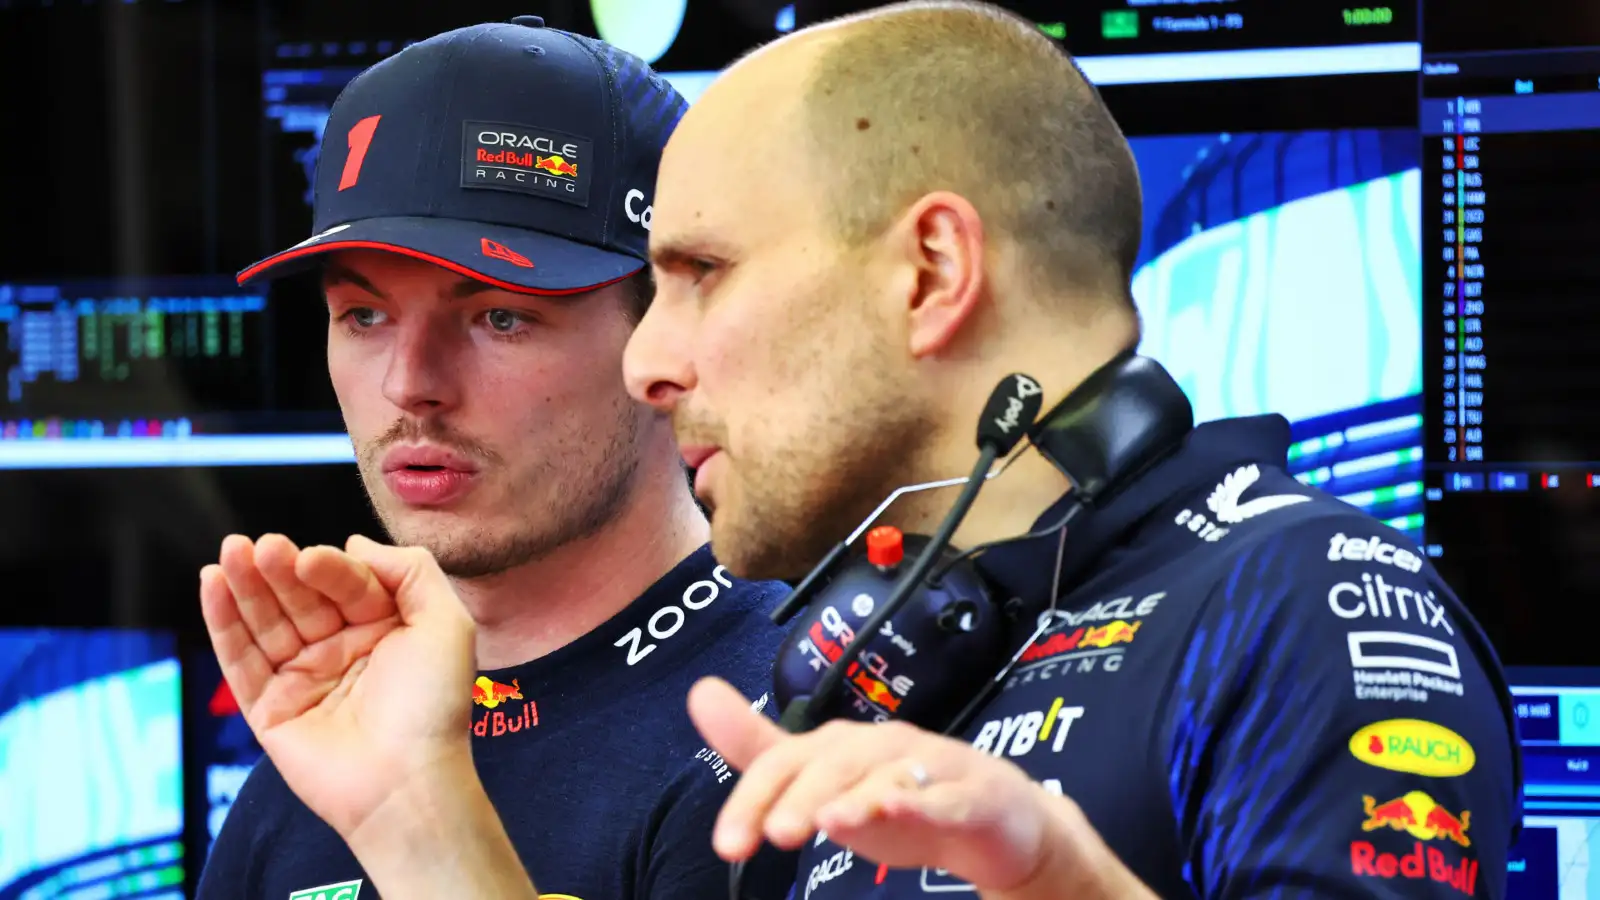 Gianpiero Lambiase, race engineer, chats with Max Verstappen at the Bahrain Grand Prix.